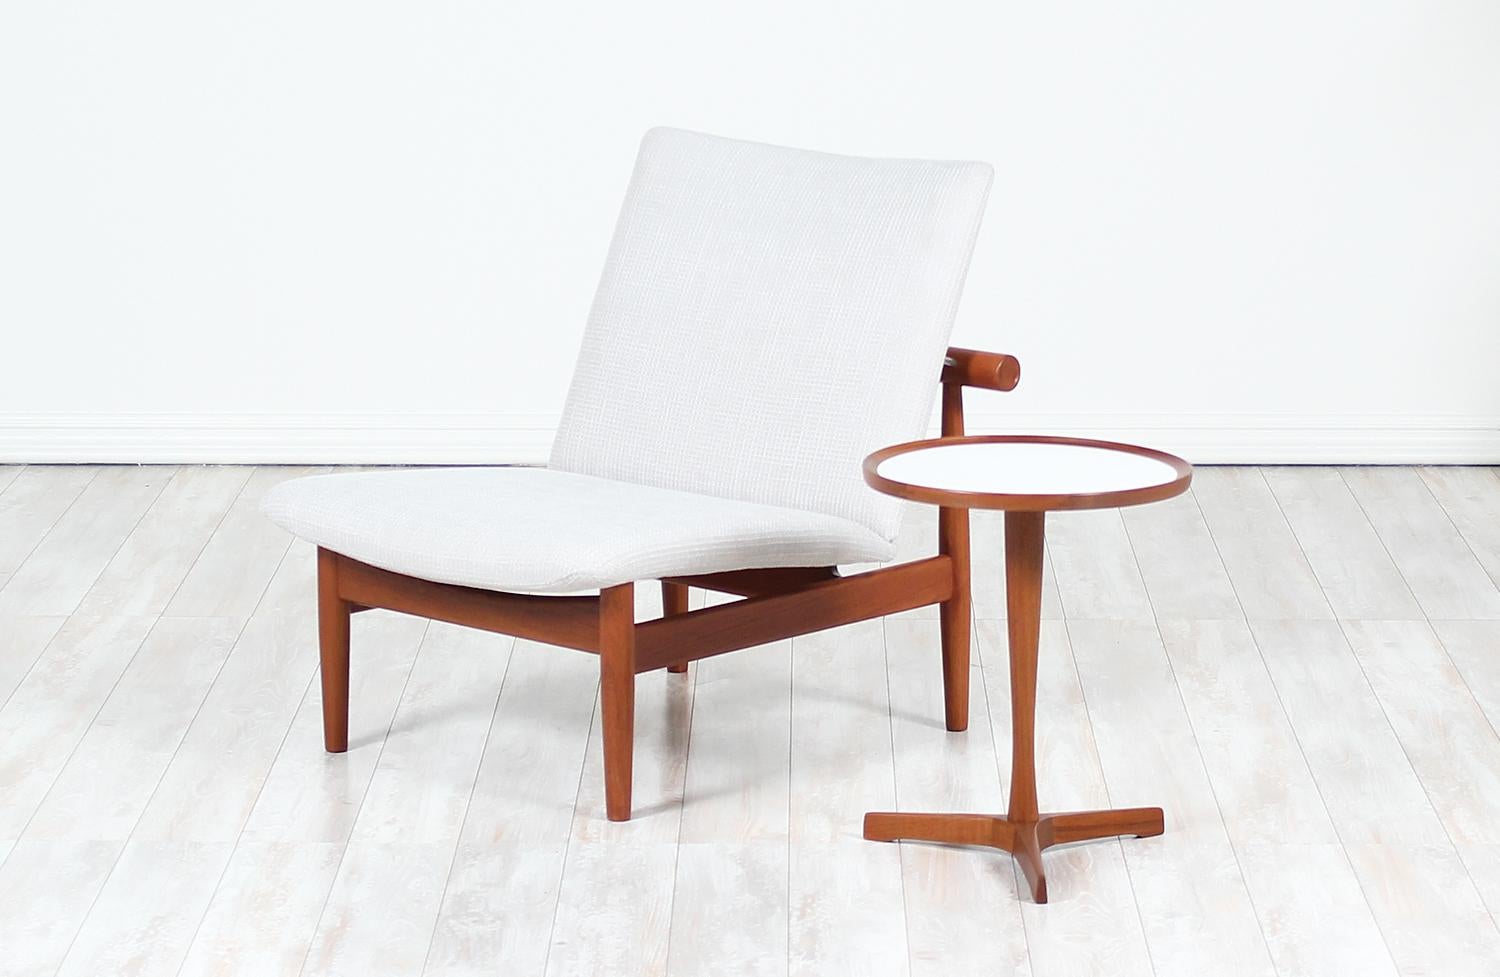 Elegant tri-leg side table designed and manufactured by Hans C. Andersen in Denmark circa 1950s. This minimalist side table features a sculpted base comprised of three legs and its original white laminate inlaid round top. This table has been